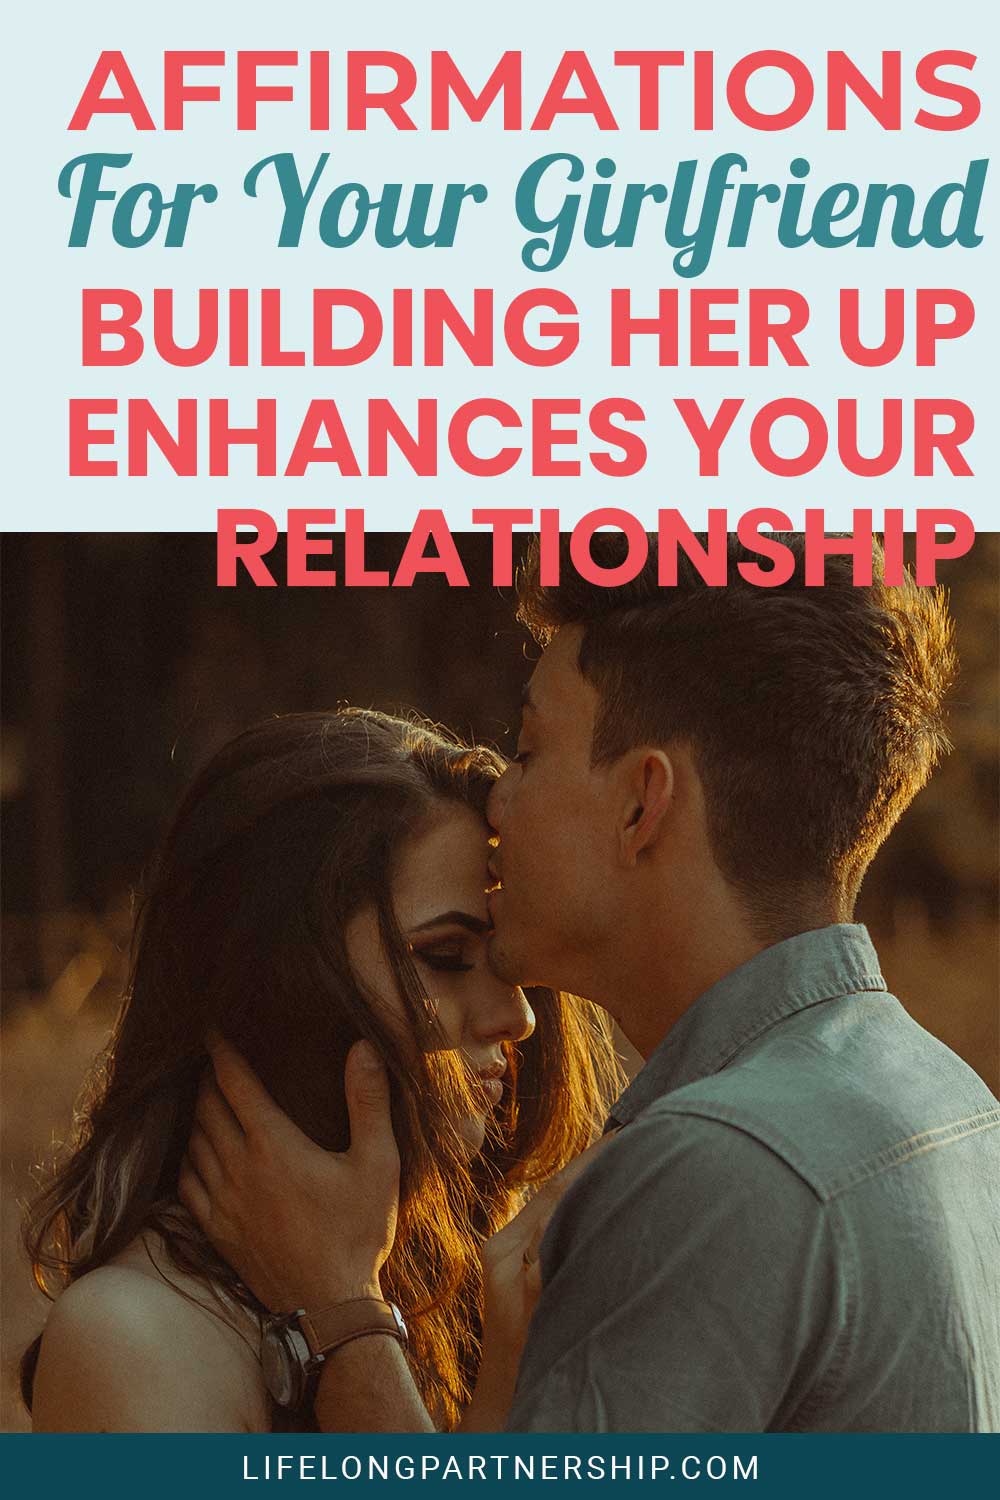 Affirmations For Your Girlfriend – Building Her Up Enhances Your Relationship